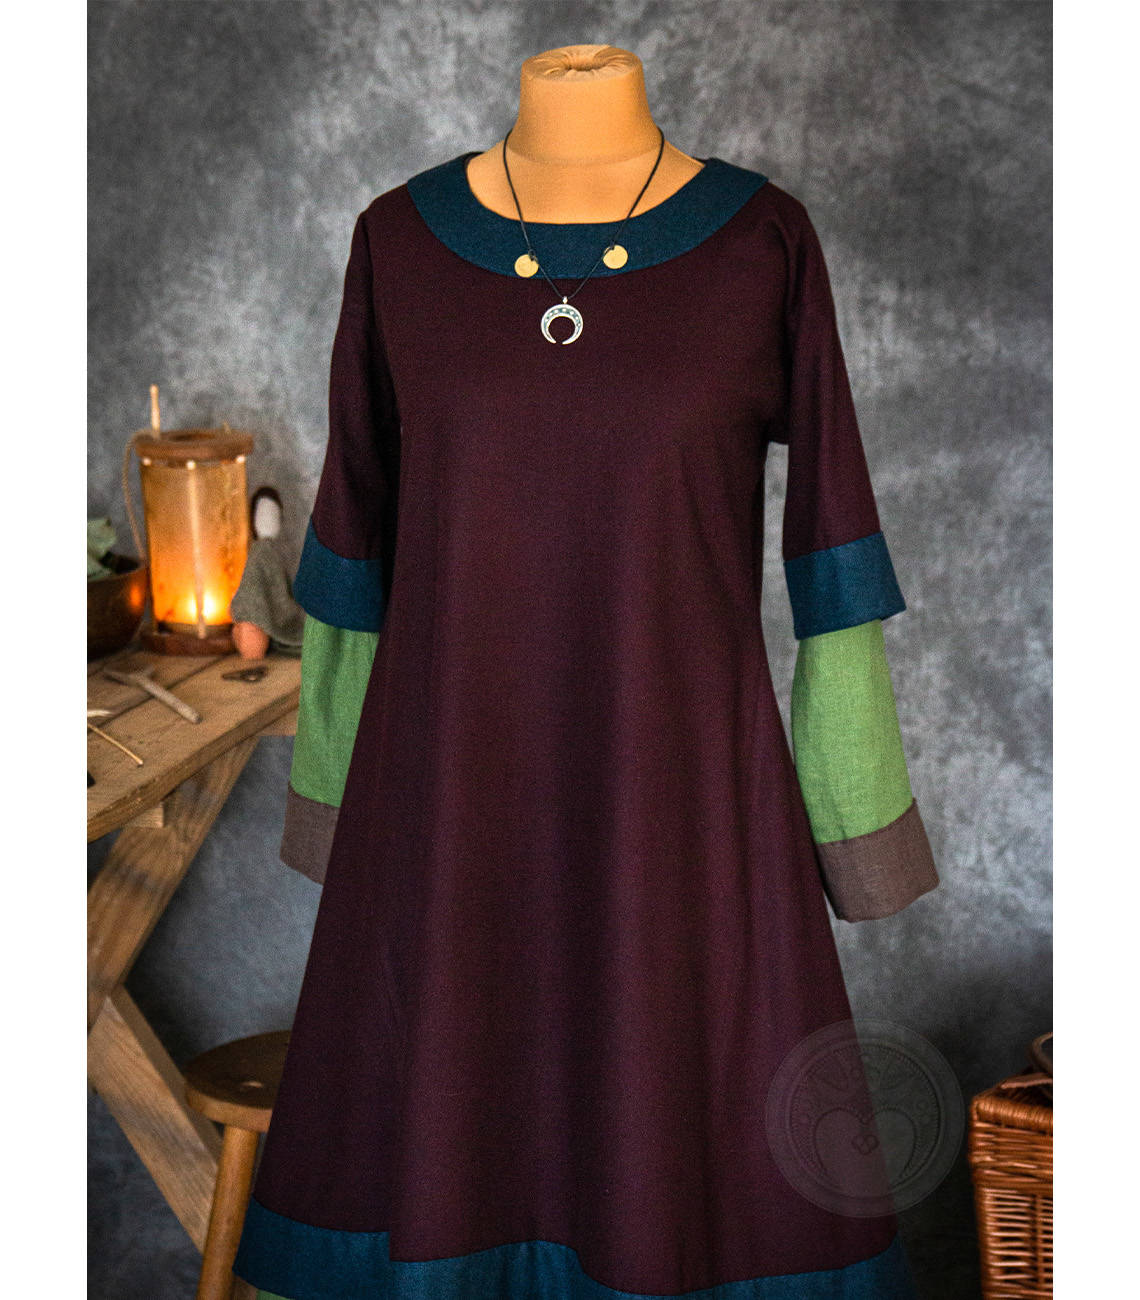 https://static2.slavmedievalshop.com/eng_pl_Kiev-Rus-basic-wool-wide-womens-tunic-with-two-wedges-and-wool-hems-566_9.jpg